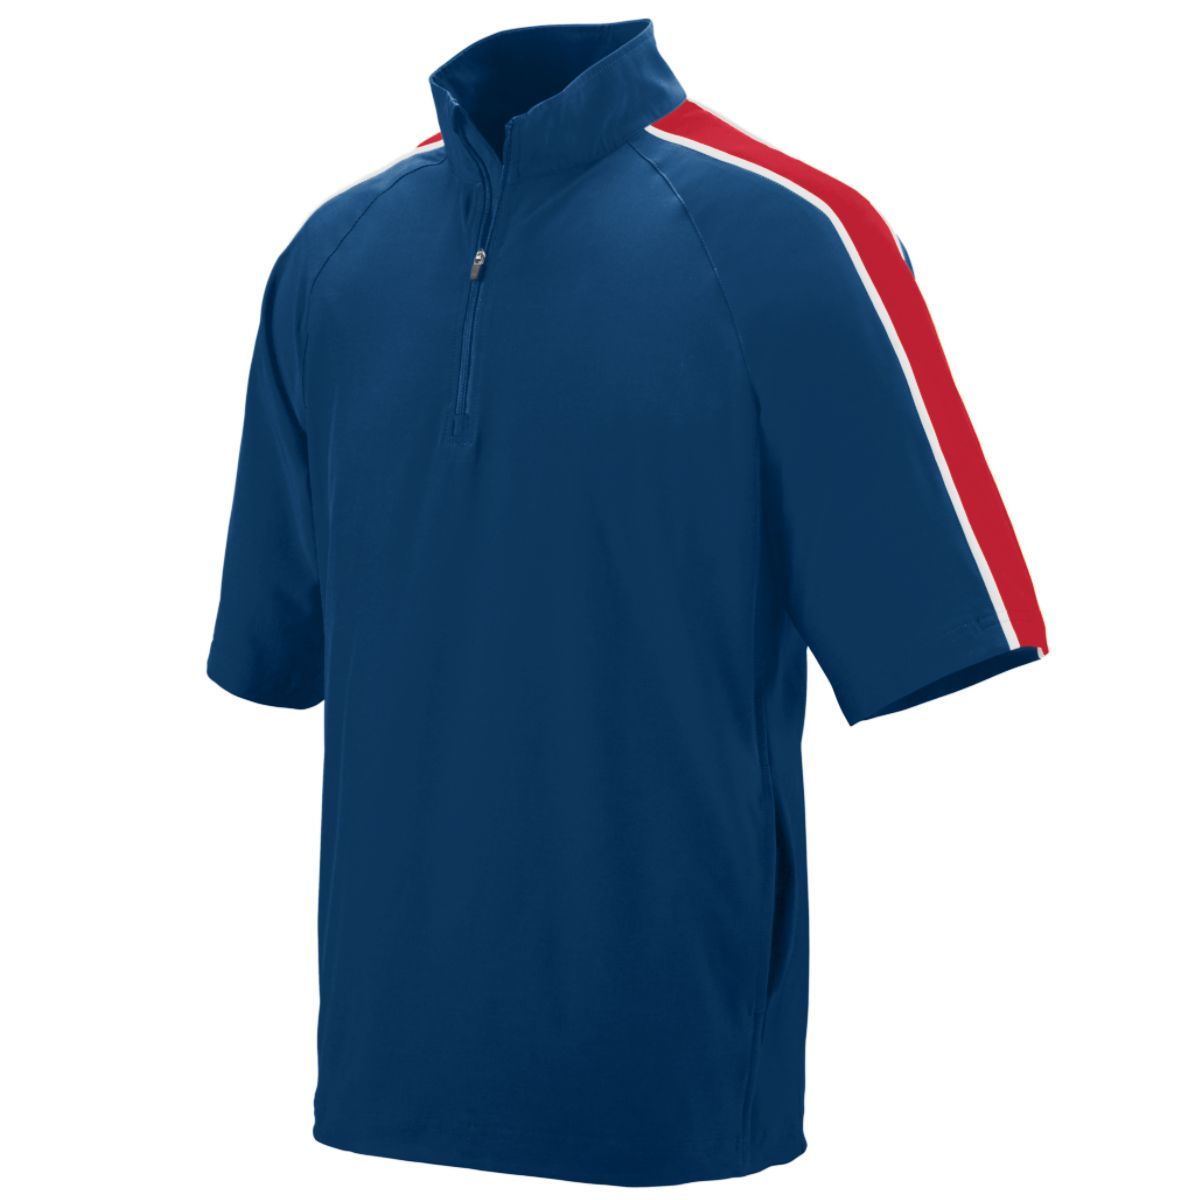 Augusta Sportswear Quantum Short Sleeve Pullover in Navy/Red/White  -Part of the Adult, Adult-Jacket, Augusta-Products, Outerwear product lines at KanaleyCreations.com